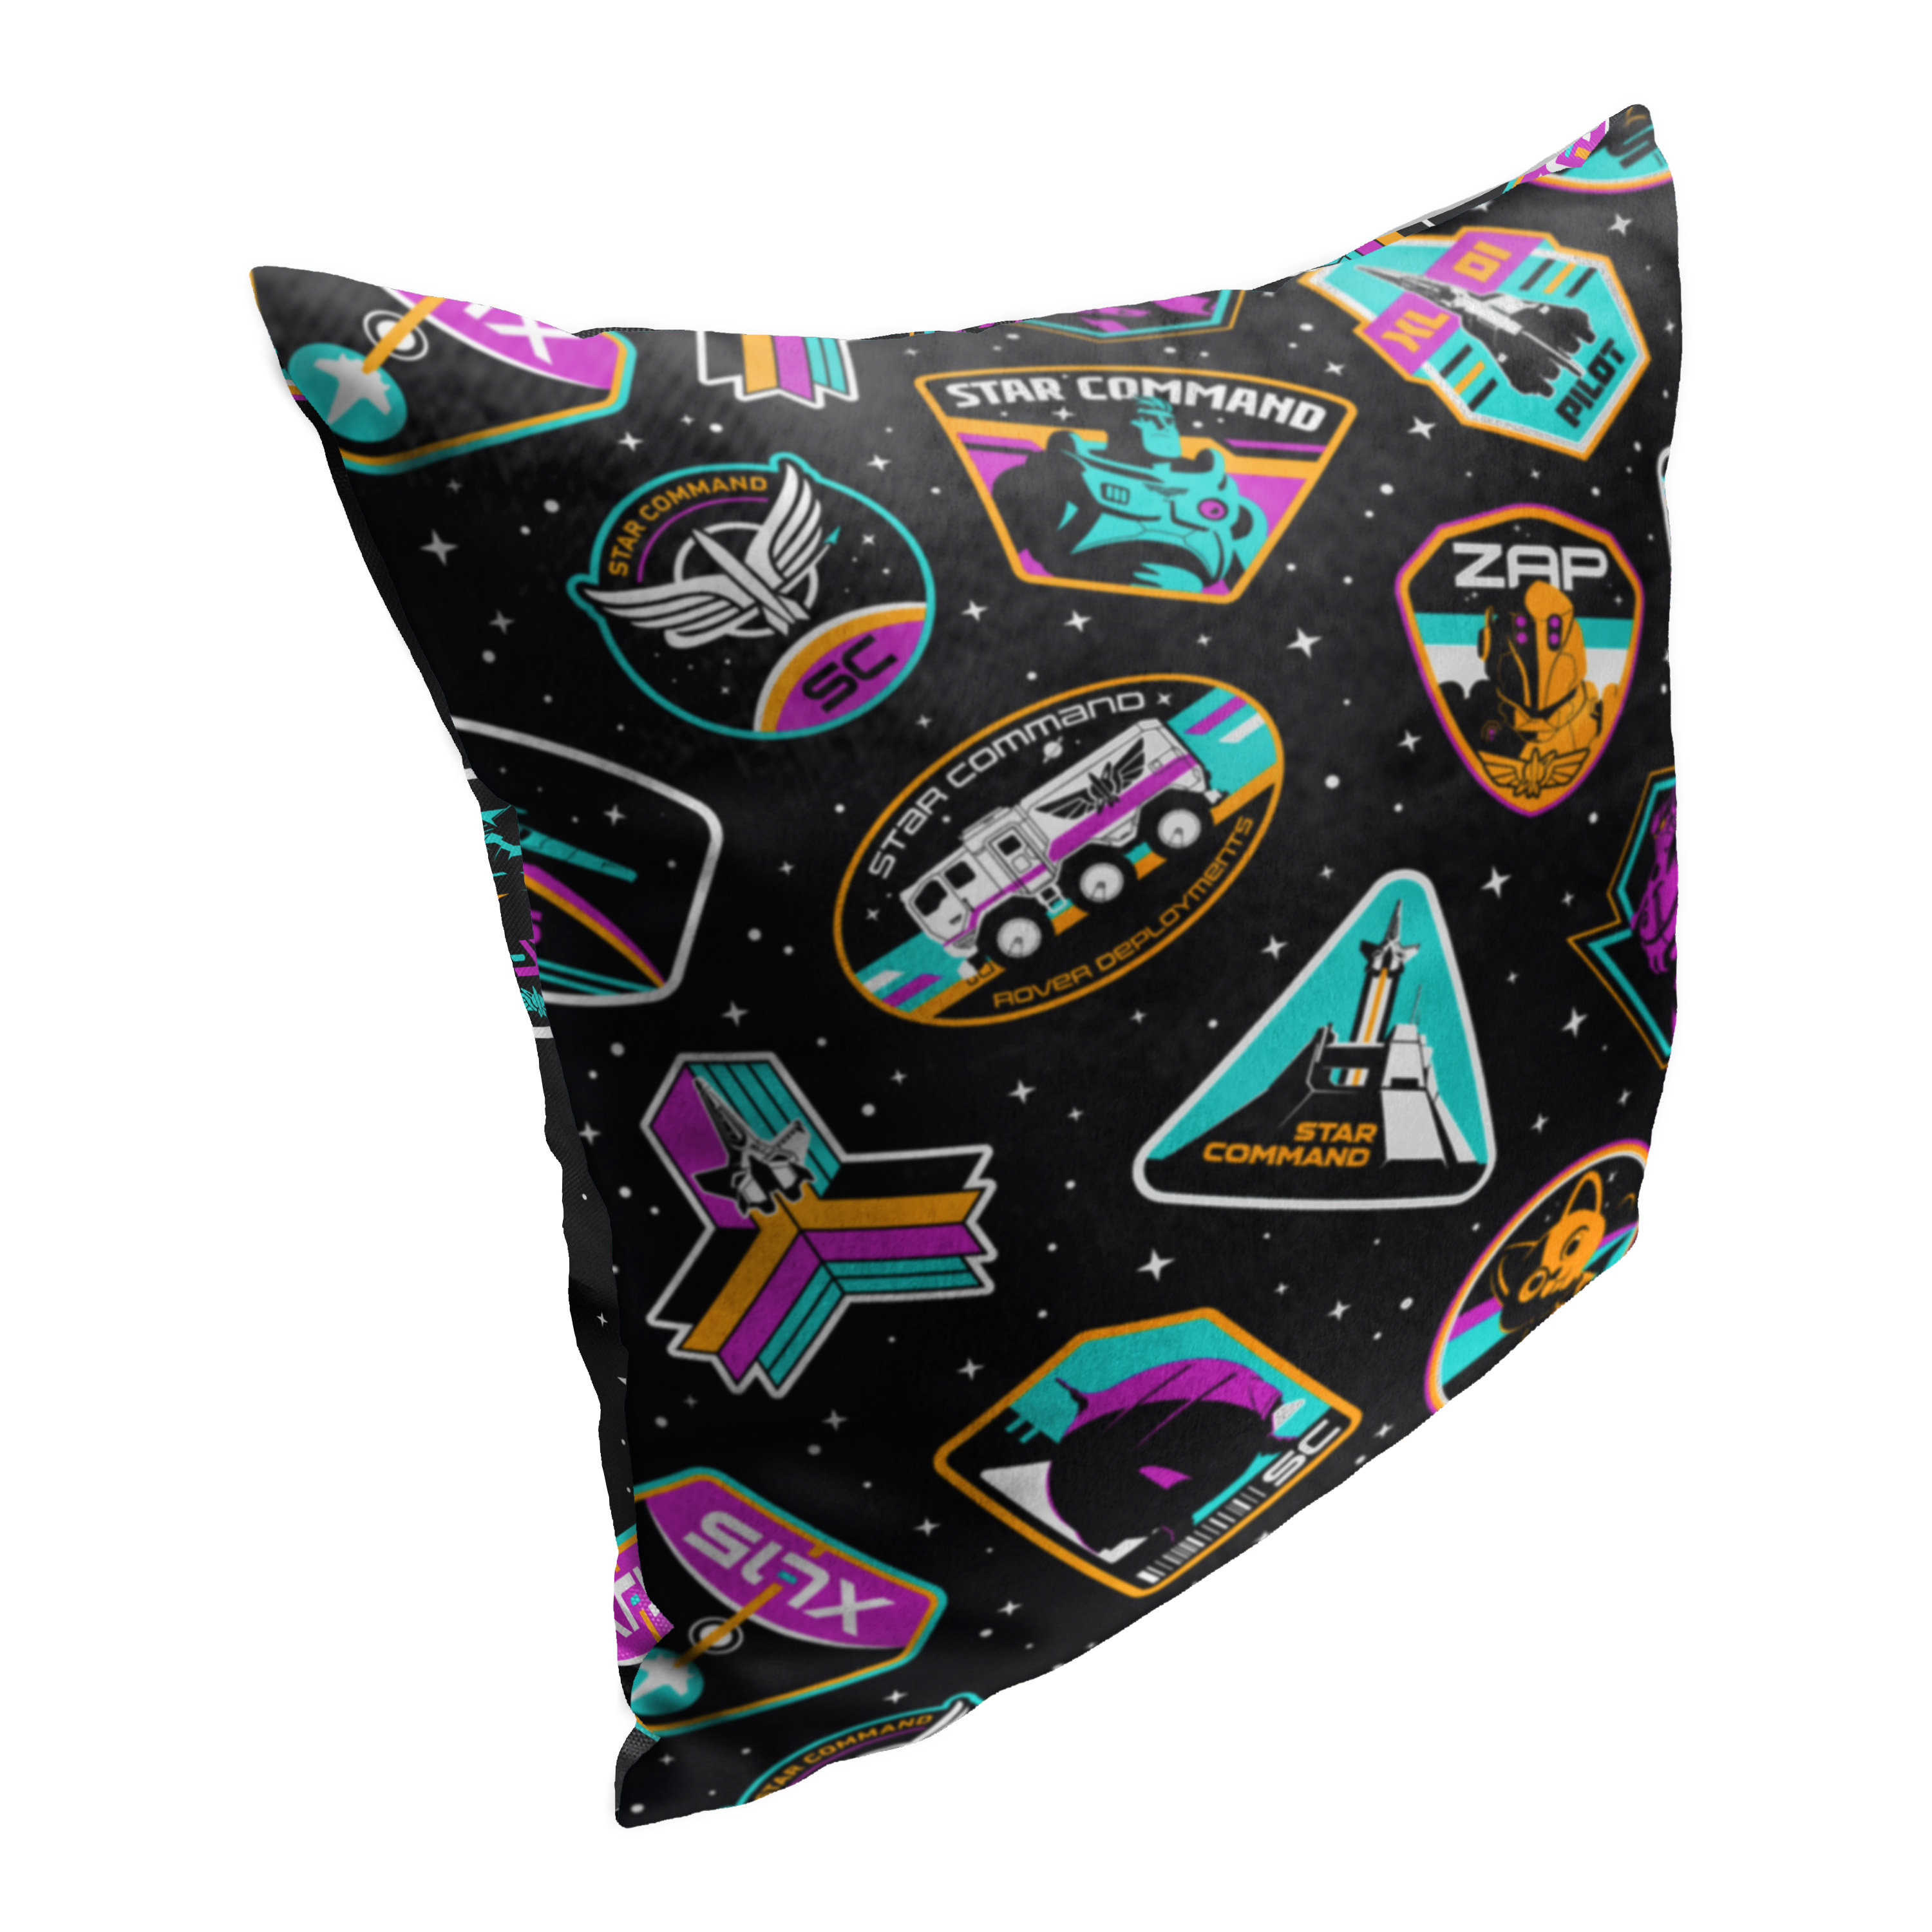 Polyester Pillow Cover Northwest